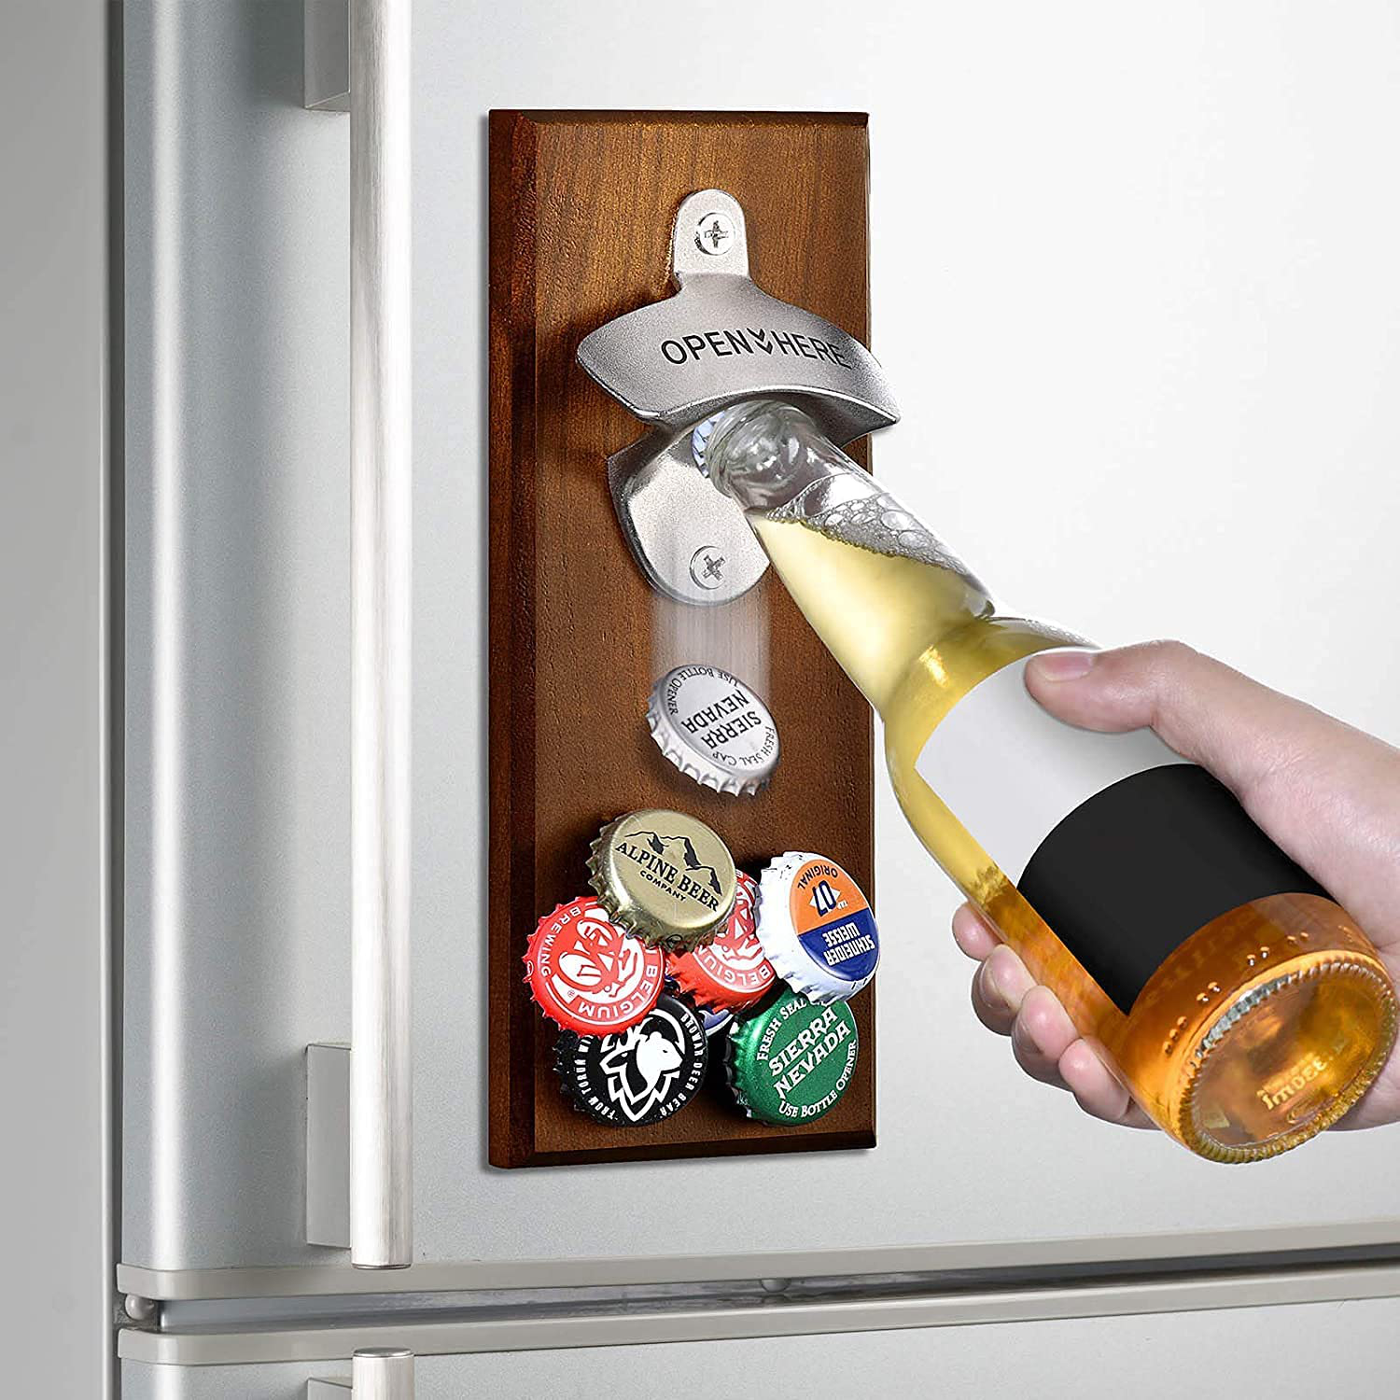 Gifts for Men Dad Him, Magnetic Bottle Opener Wall Mounted, Unique Beer Birthday Gift Ideas for Boyfriend Husband Women Mom, Cool Stuff Gadgets, Housewarming Wedding Retirement Presents